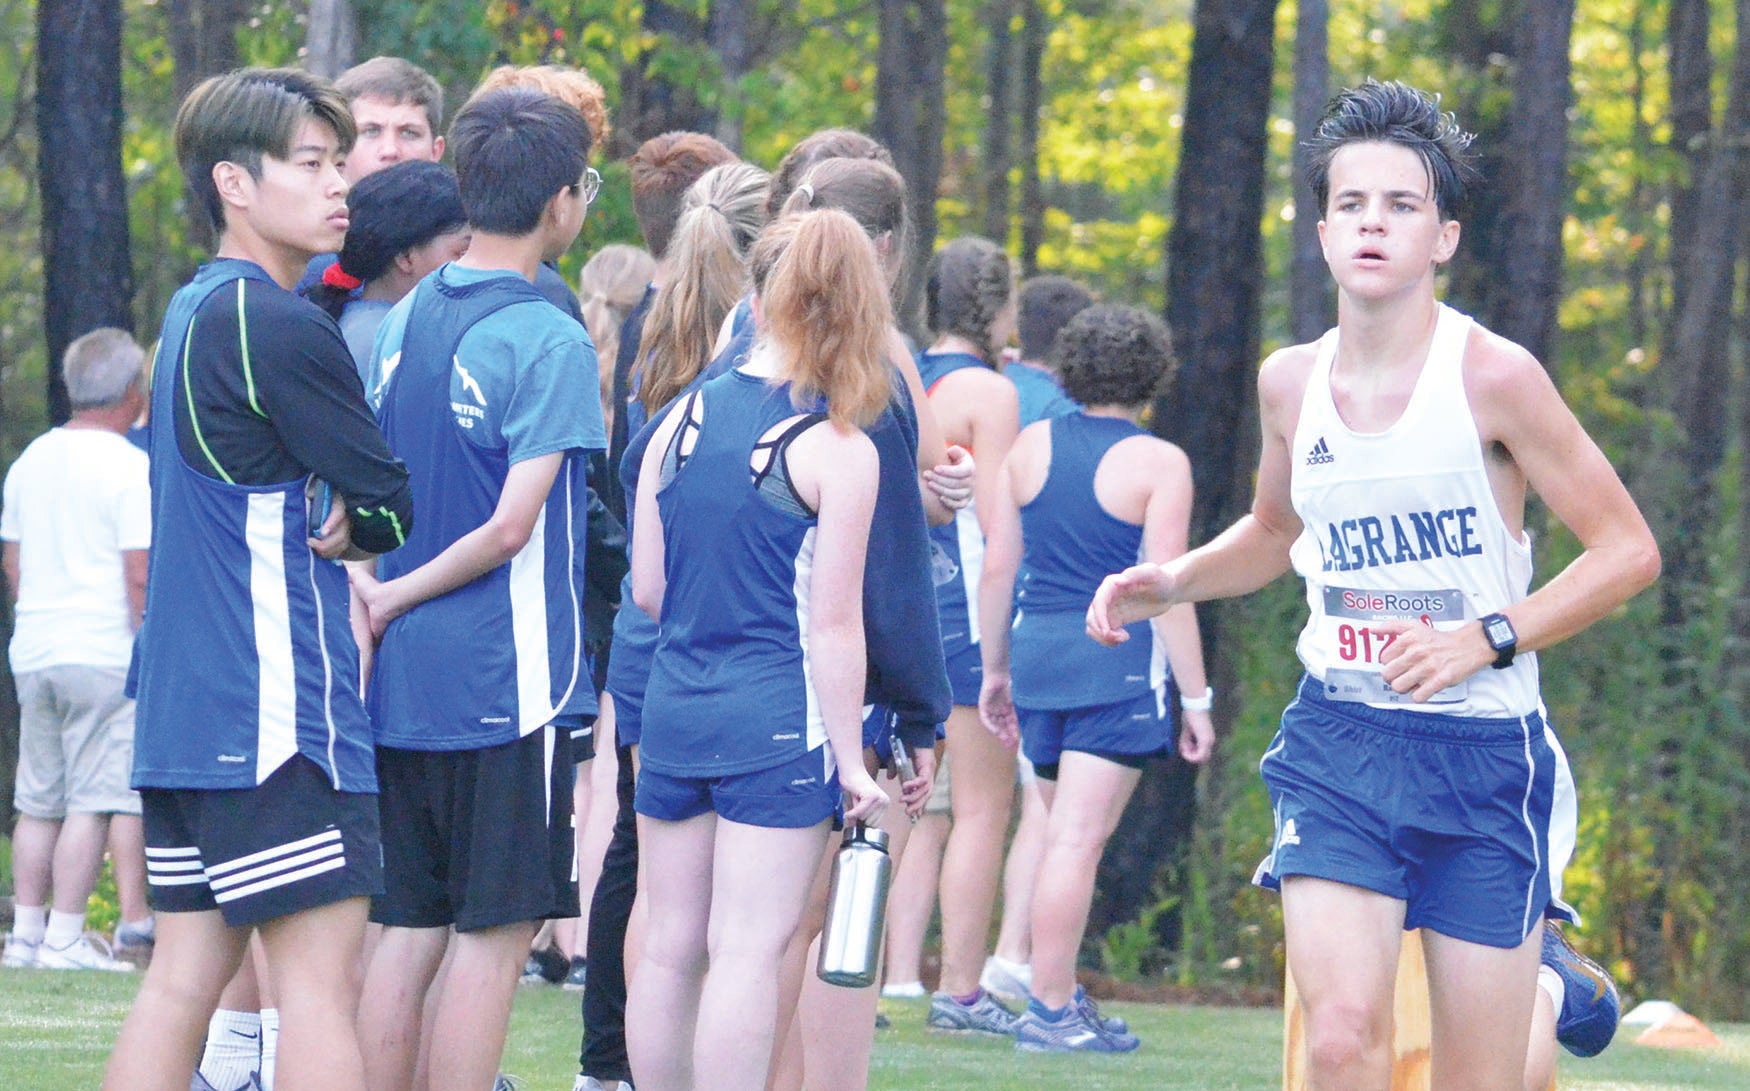 Runners hit the trail at Callaway